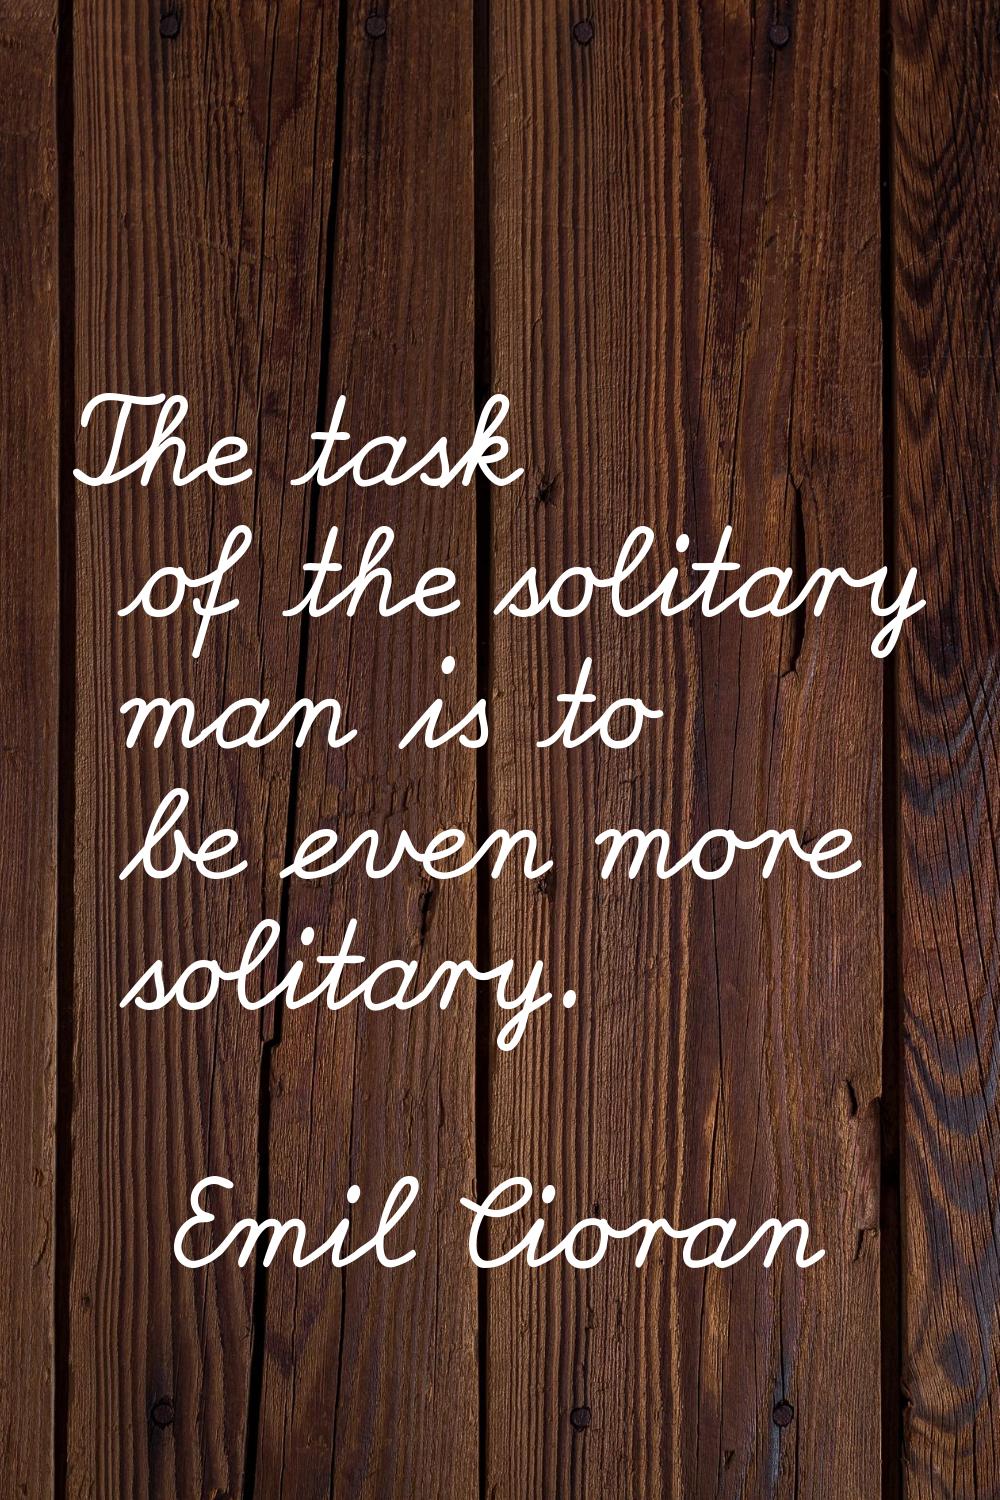 The task of the solitary man is to be even more solitary.